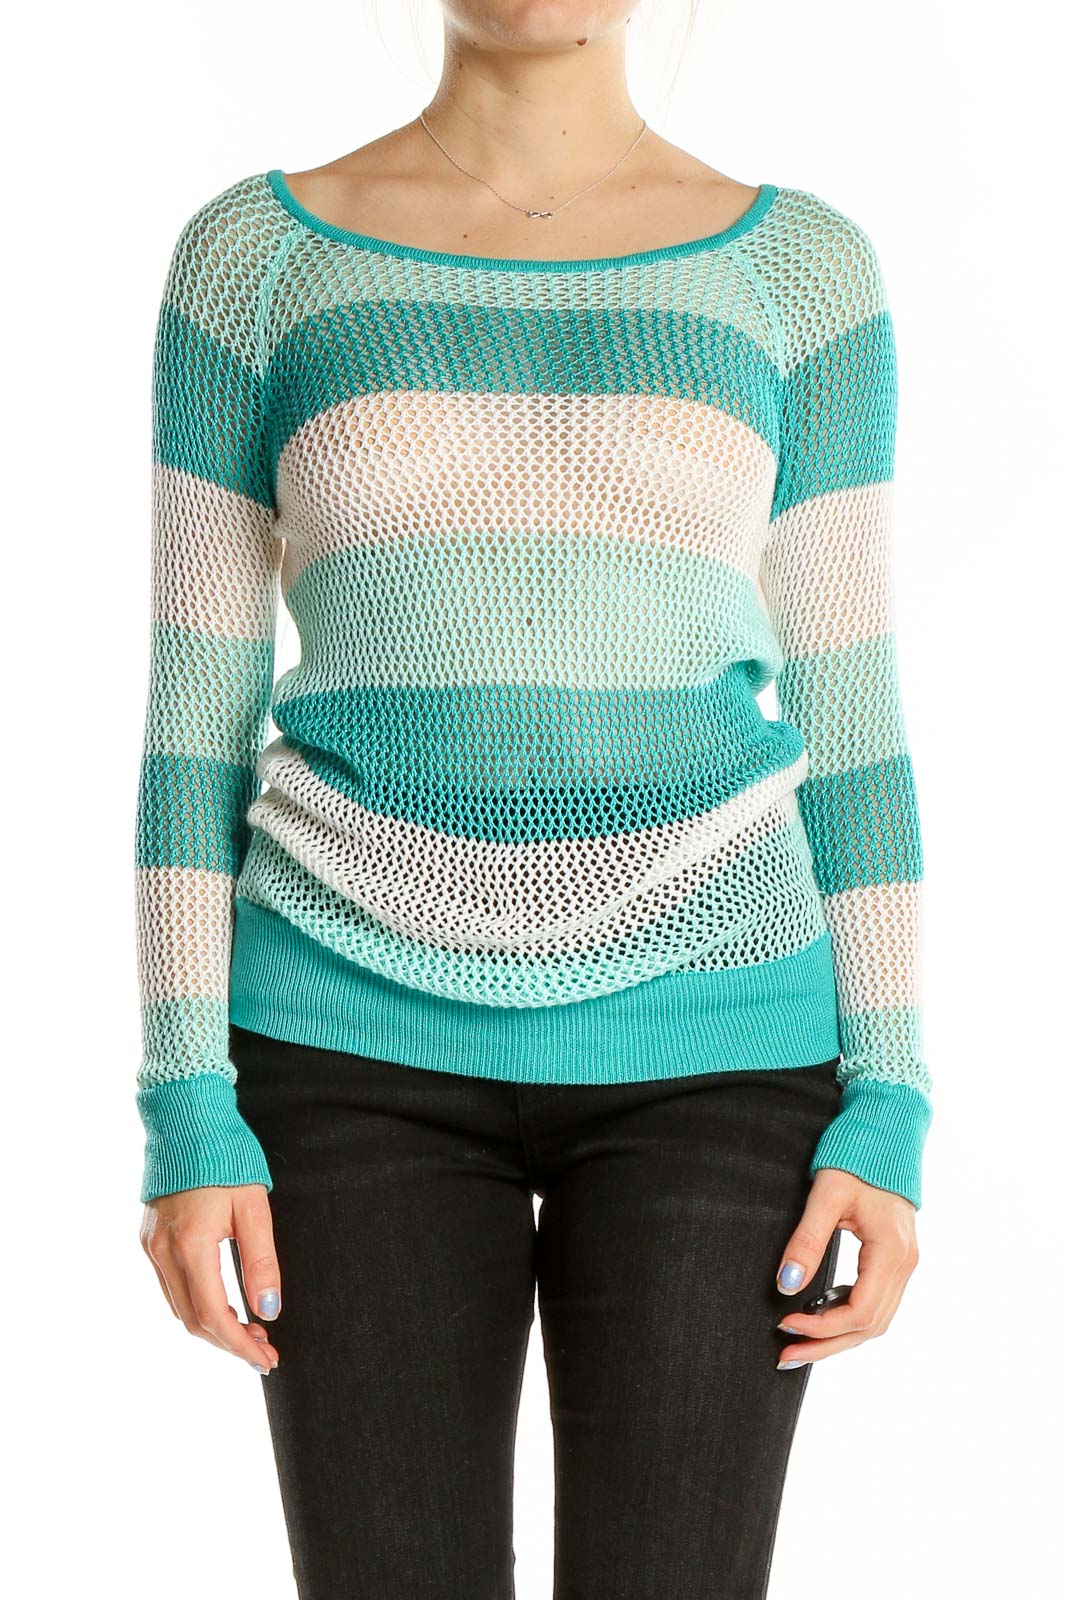 Blue Striped Textured Top Front